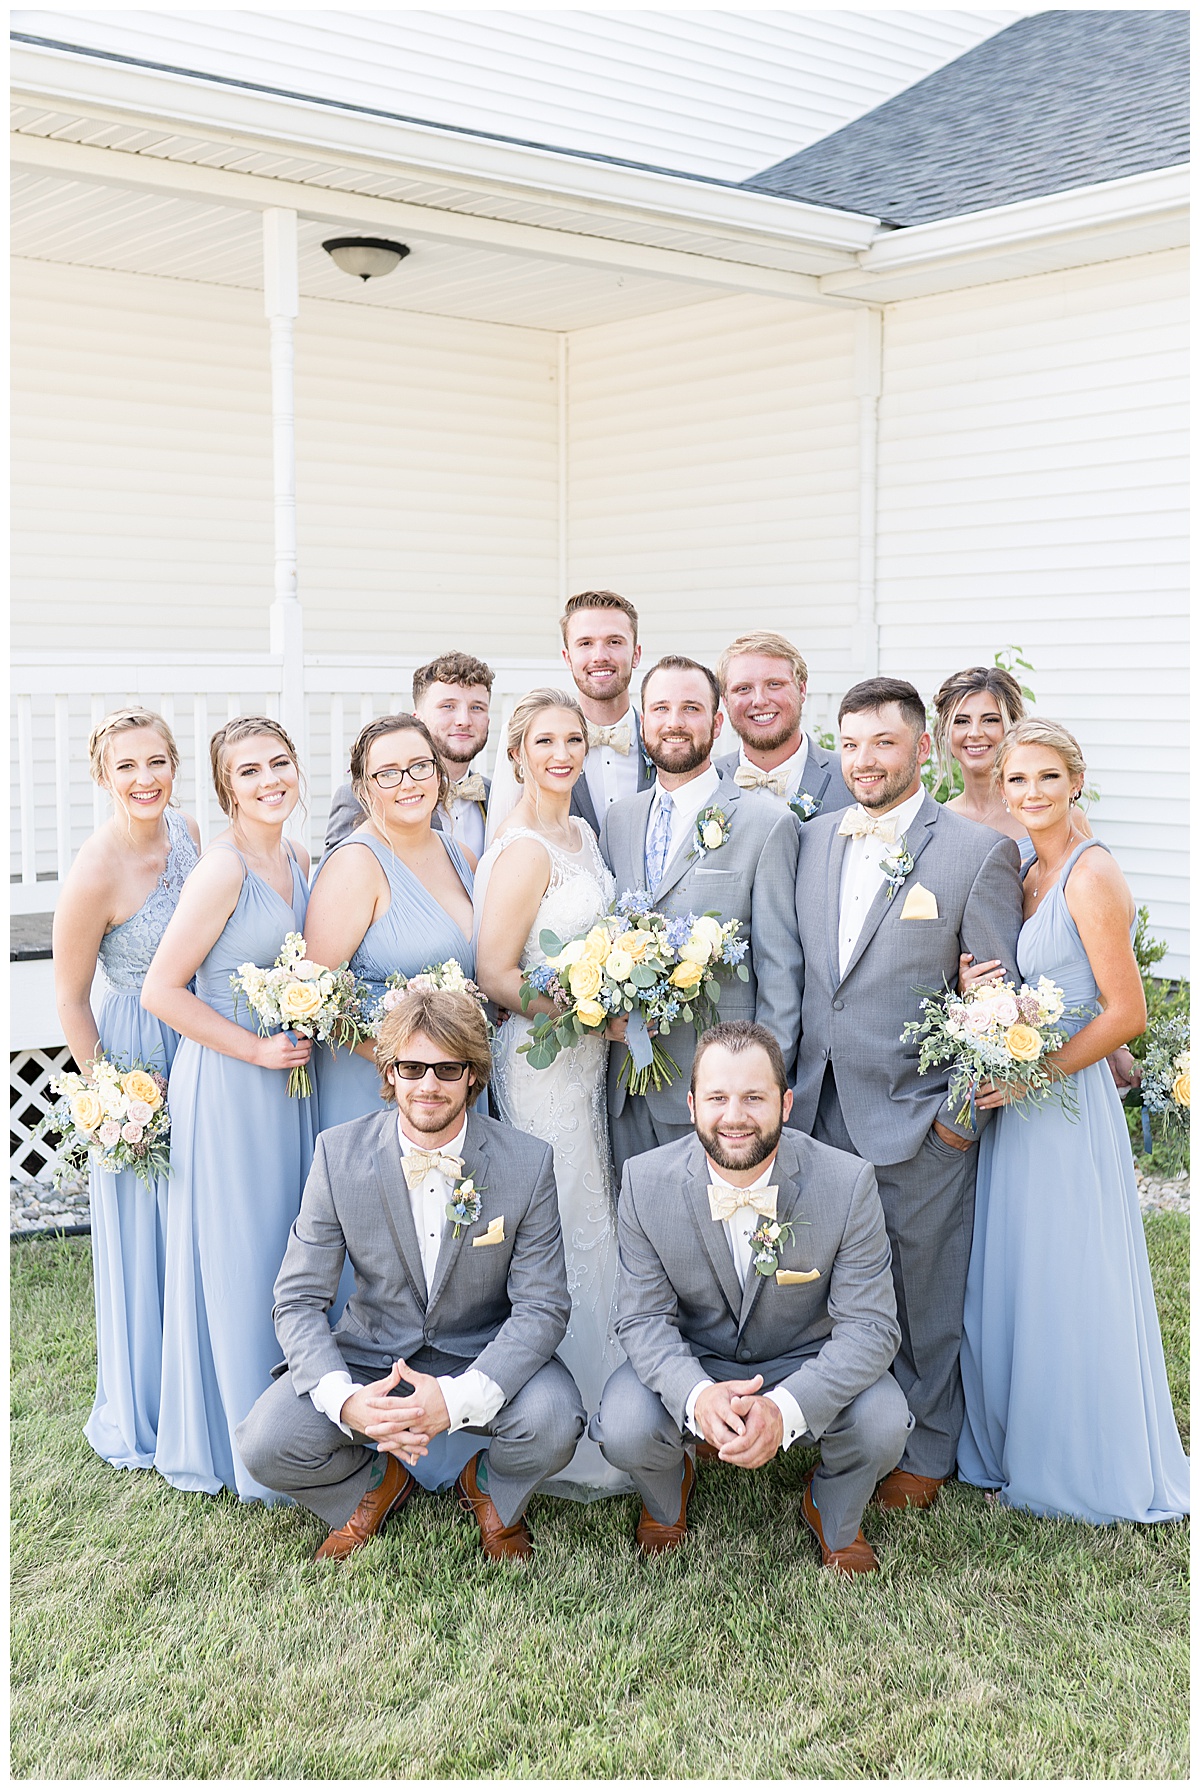 Bridal party photos at Gathering Acres wedding in Lafayette, Indiana